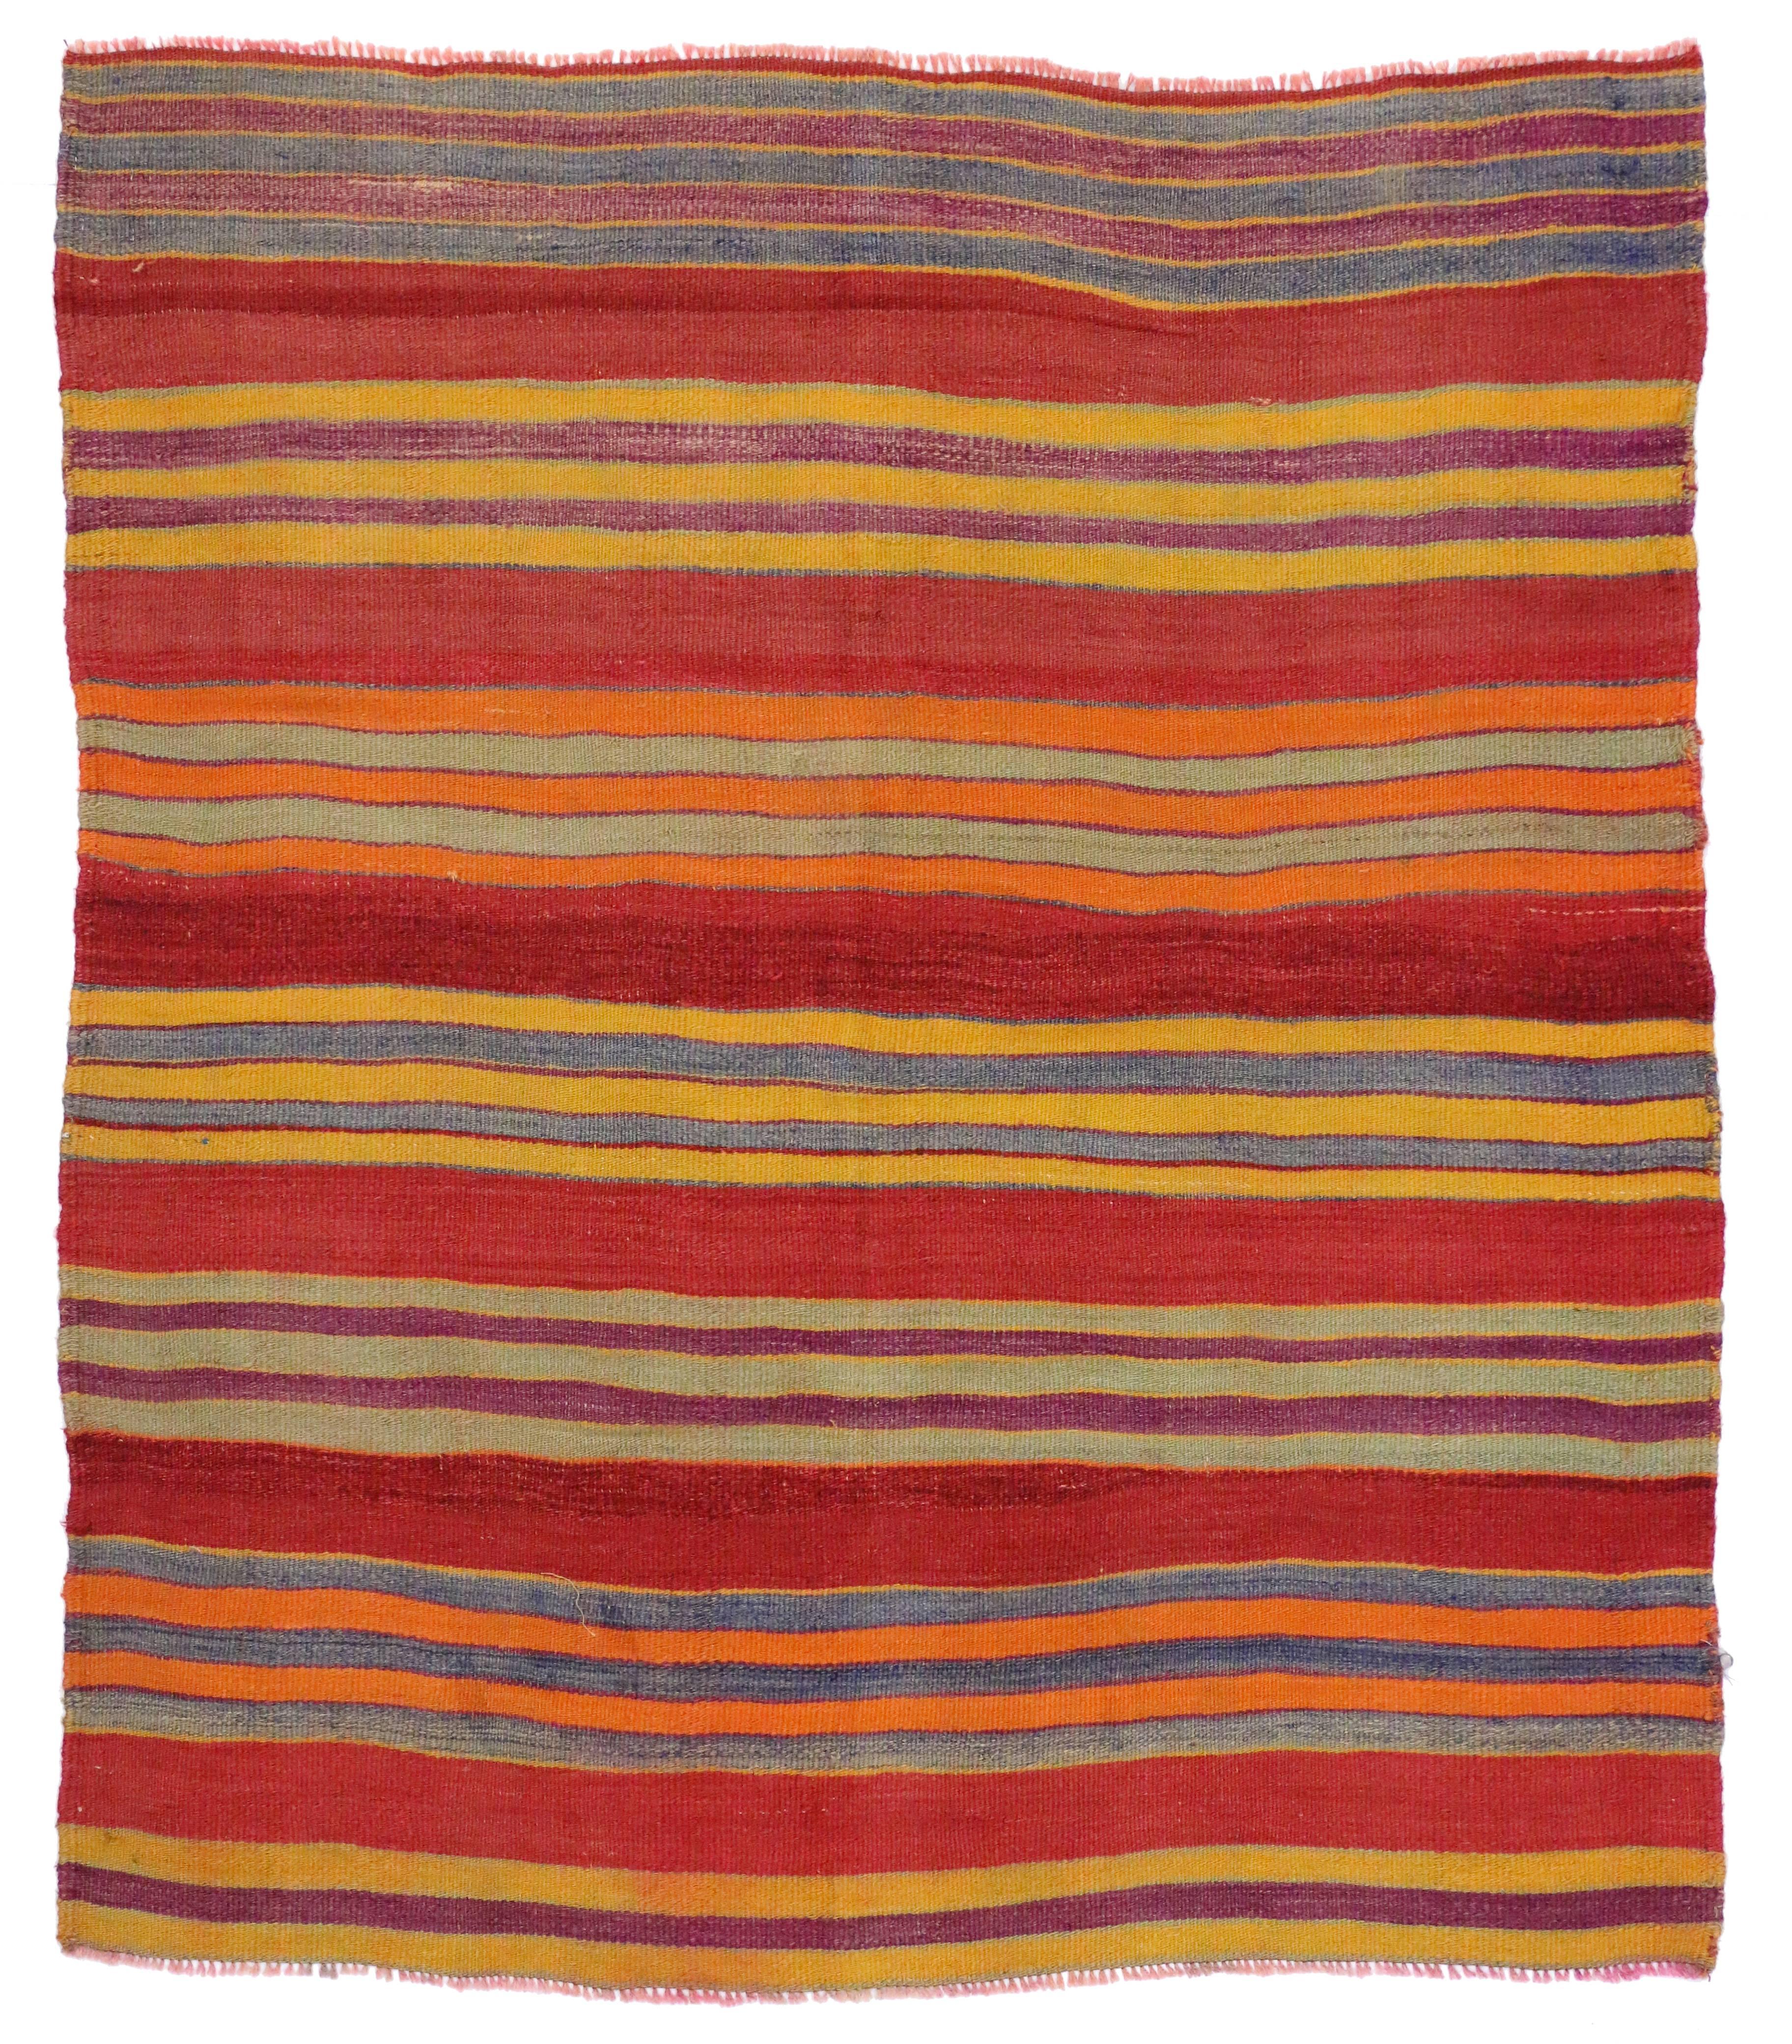 Wool Vintage Turkish Kilim with Multi-Color Stripes in Modern Style, Red FlatWeave